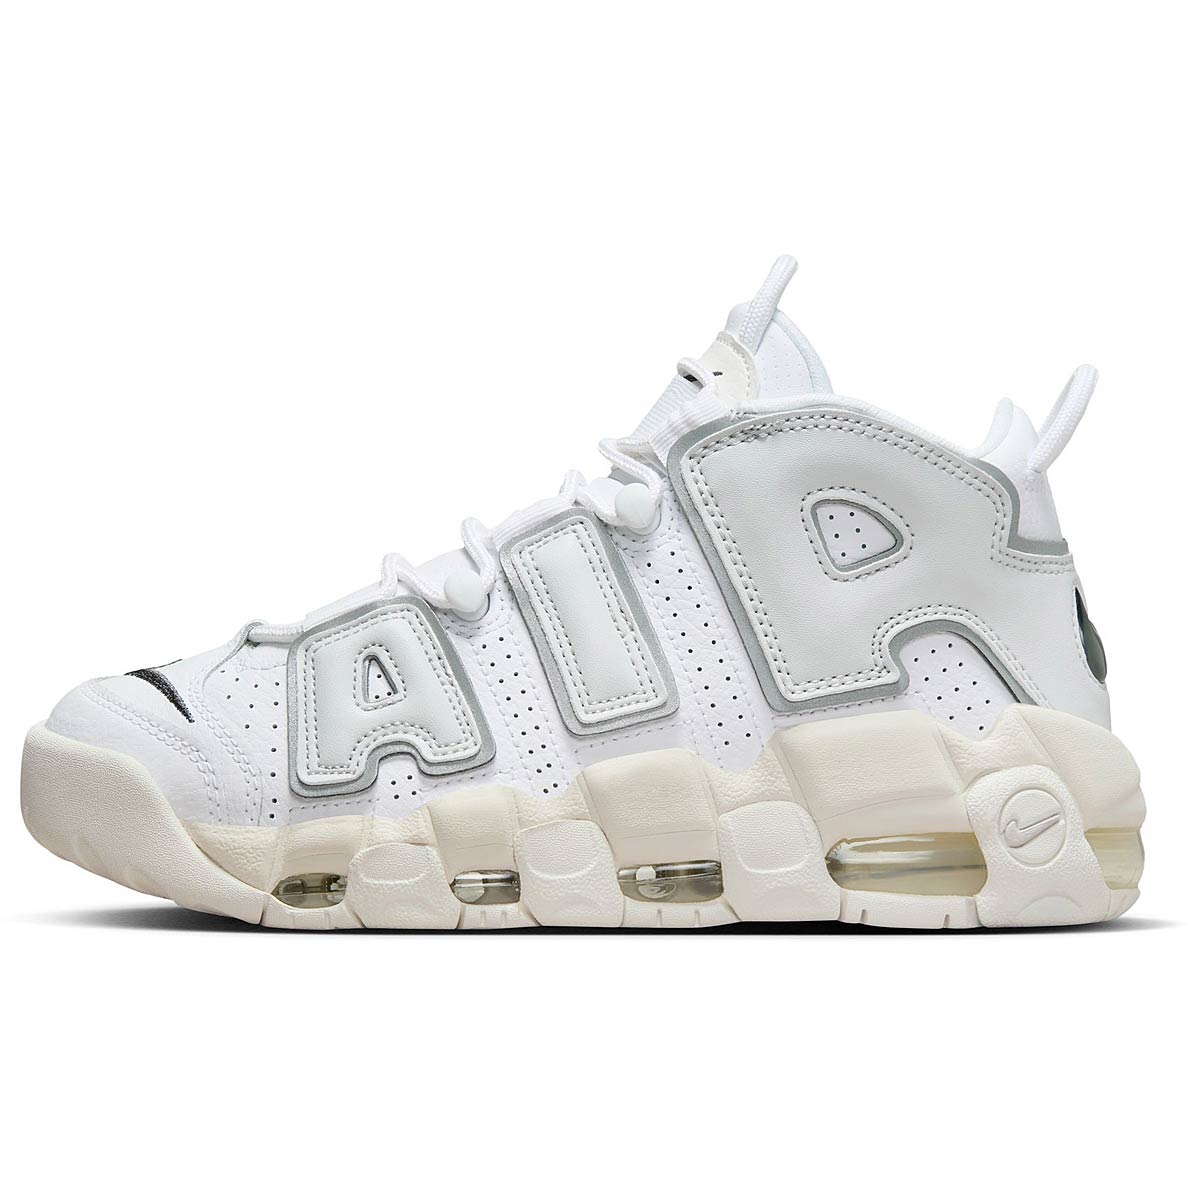 Image of Nike Wmns Air More Uptempo, White/iron Grey-photon Dust